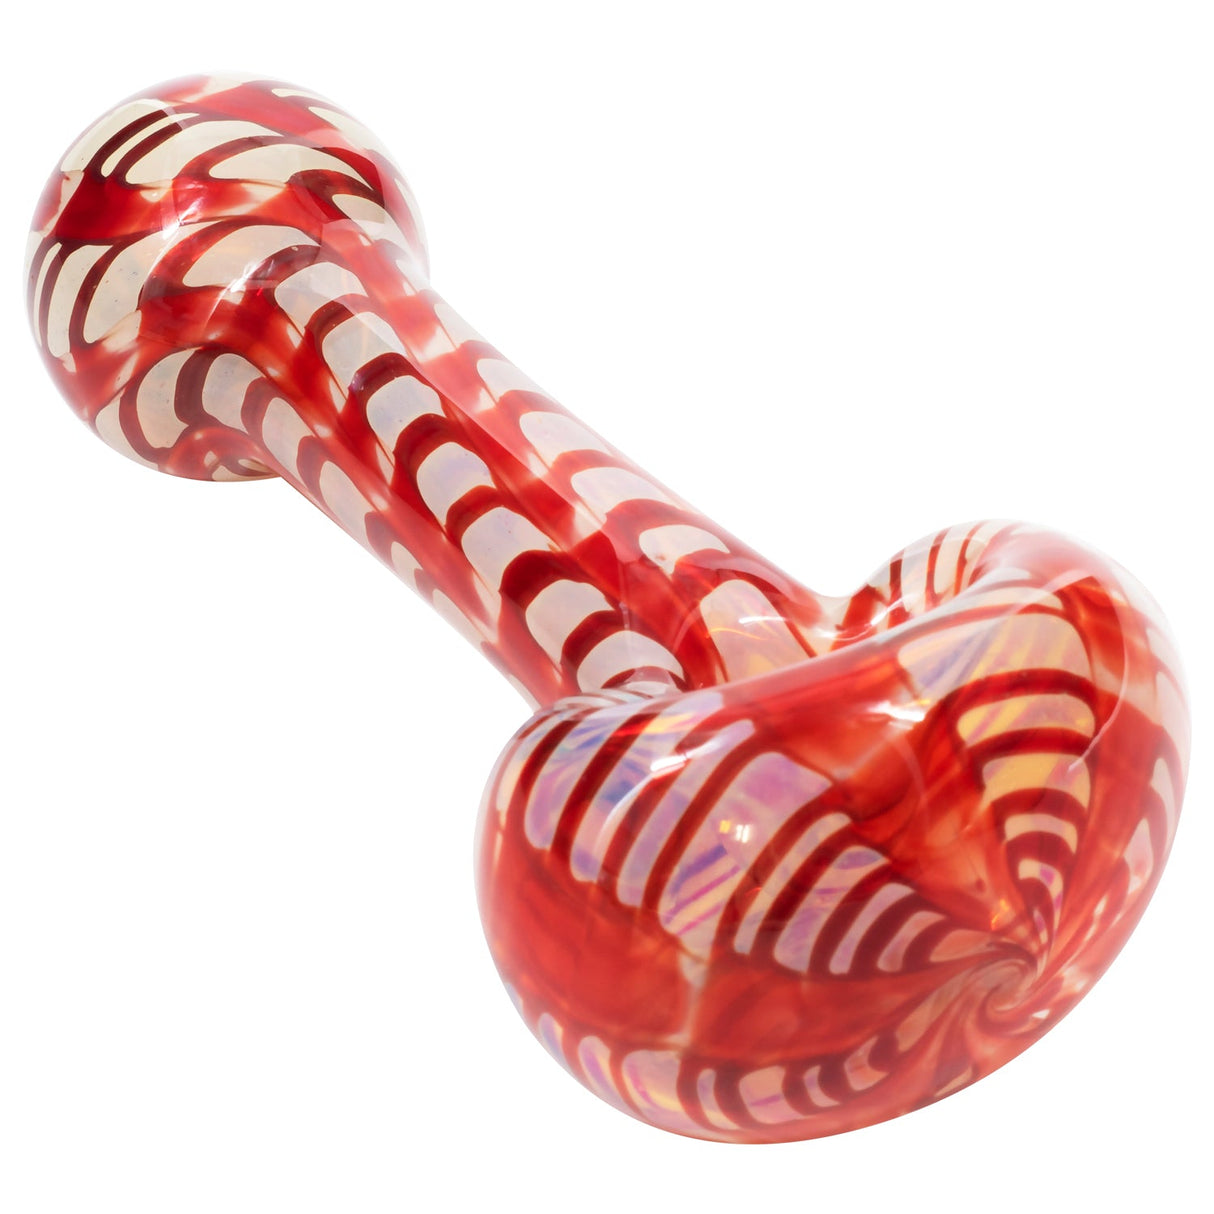 LA Pipes "Raker" Glass Spoon Pipe with Fumed Color Changing Design, Side View